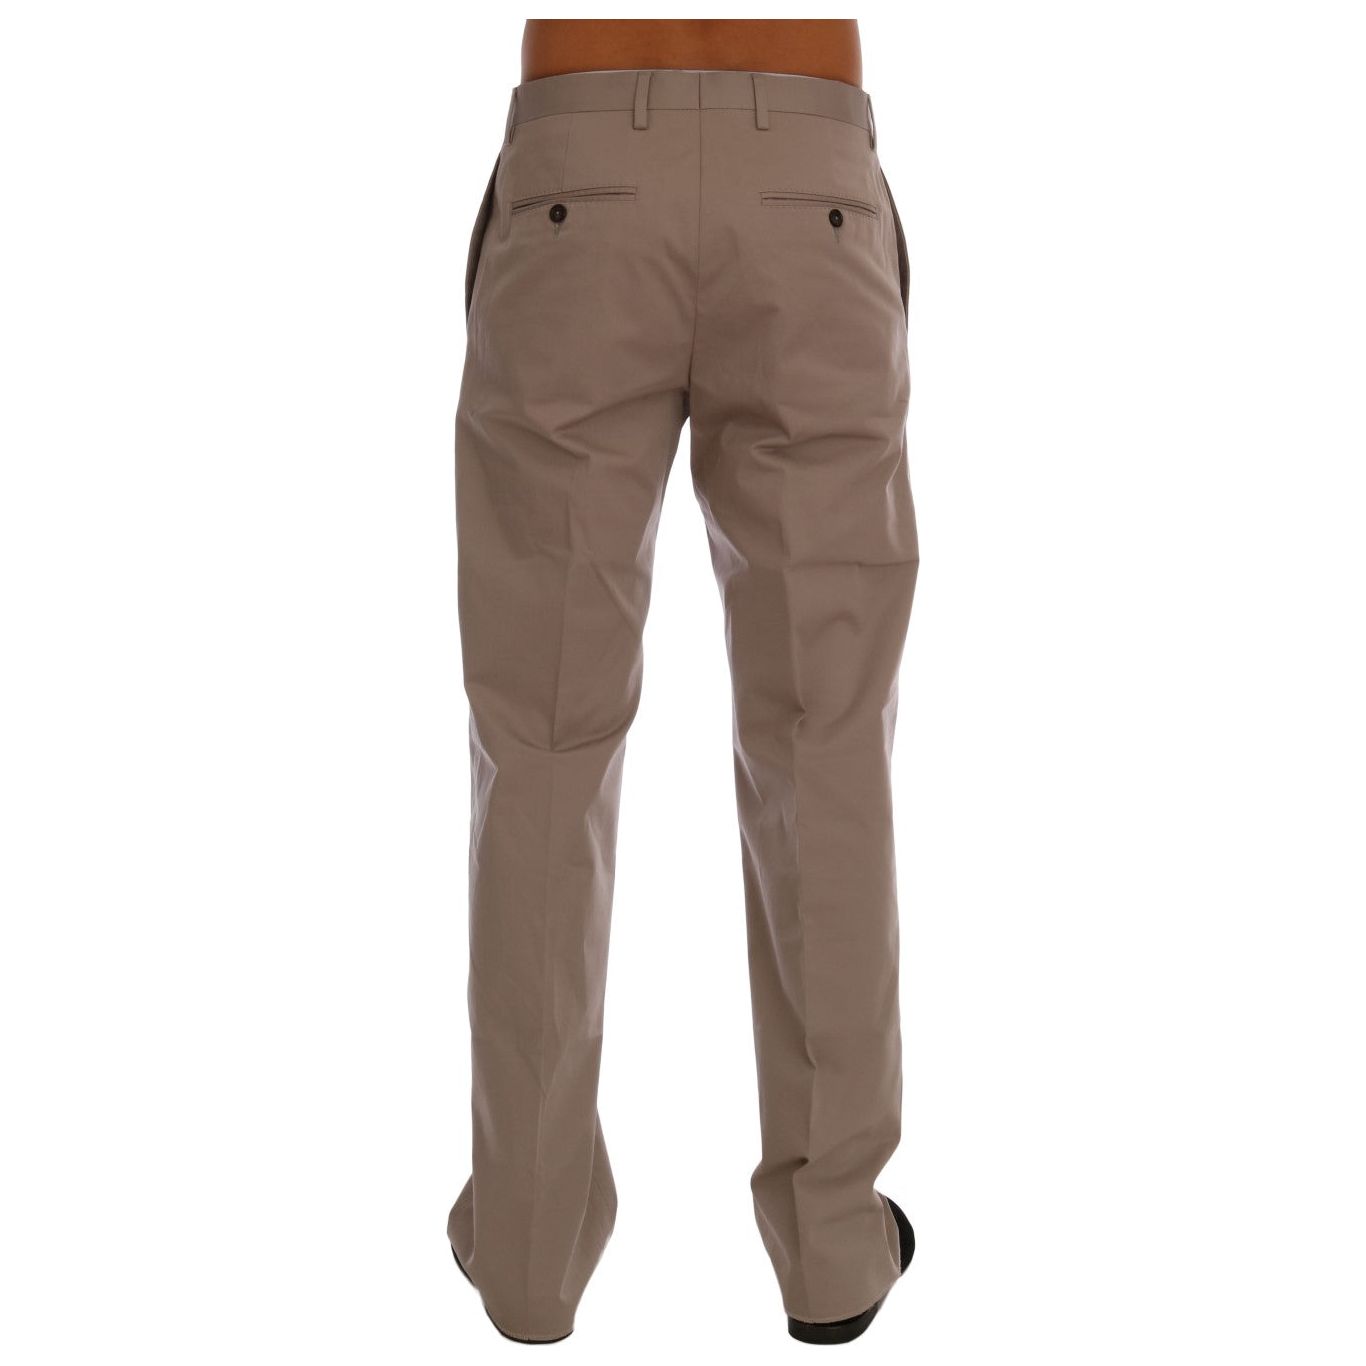 Dolce & Gabbana Chic Beige Chinos Casual Pants beige-cotton-stretch-chinos-pants Jeans & Pants 447481-beige-cotton-stretch-chinos-pants-3-2.jpg